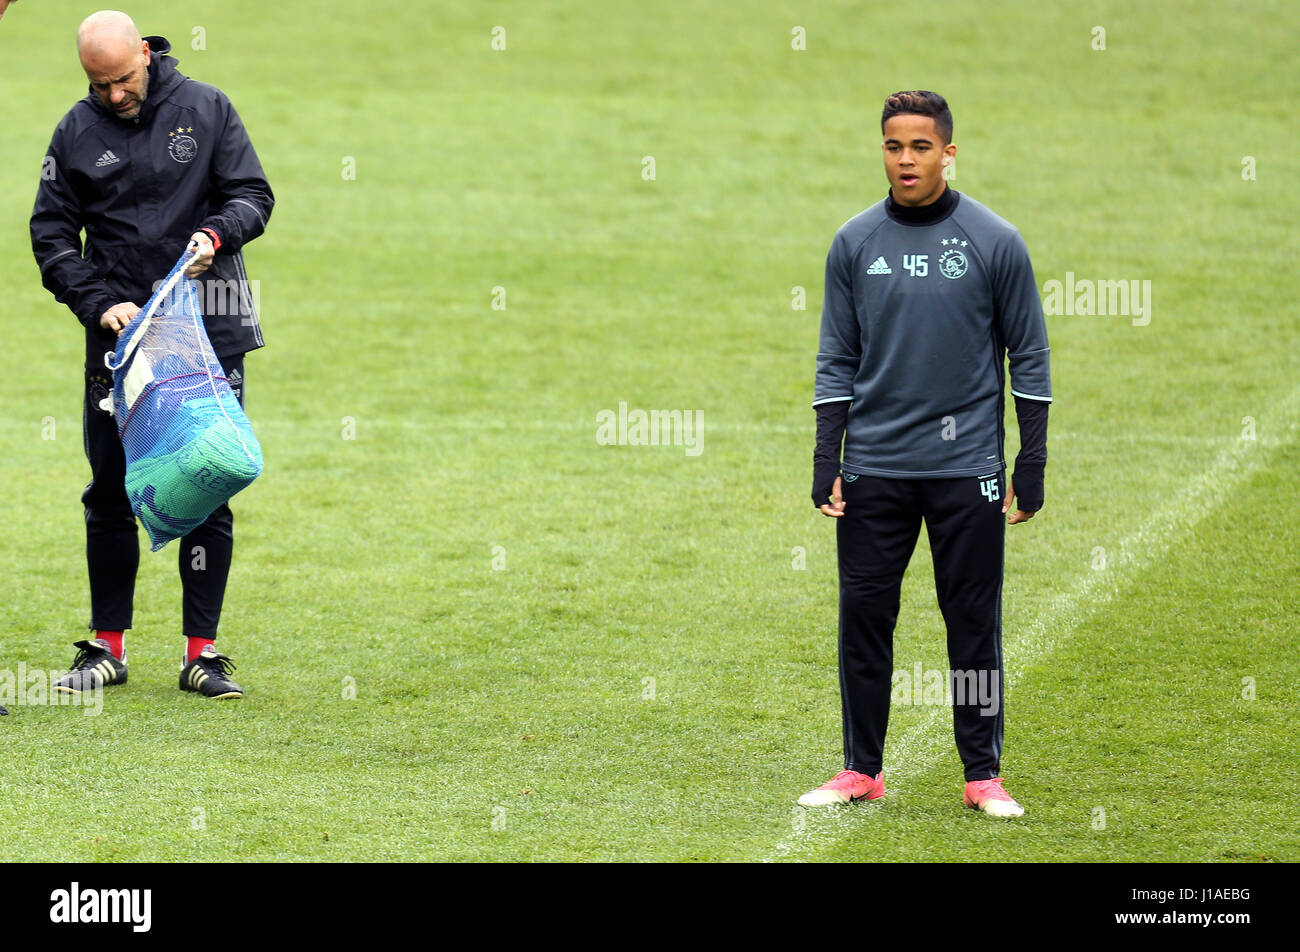 Gelsenkirchen, Germany. 19th Apr, 2017. Ajax Amsterdam player Justin Kluivert and his trainer Peter Bosz can be seen training in the Veltins Arena, in Gelsenkirchen, Germany, 19 April 2017. Ajax Amsterdam will play against FC Schalke 04 the 2nd-leg of their Europe League quarter final match on 20 April 2017. Photo: Ina Fassbender/dpa/Alamy Live News Stock Photo